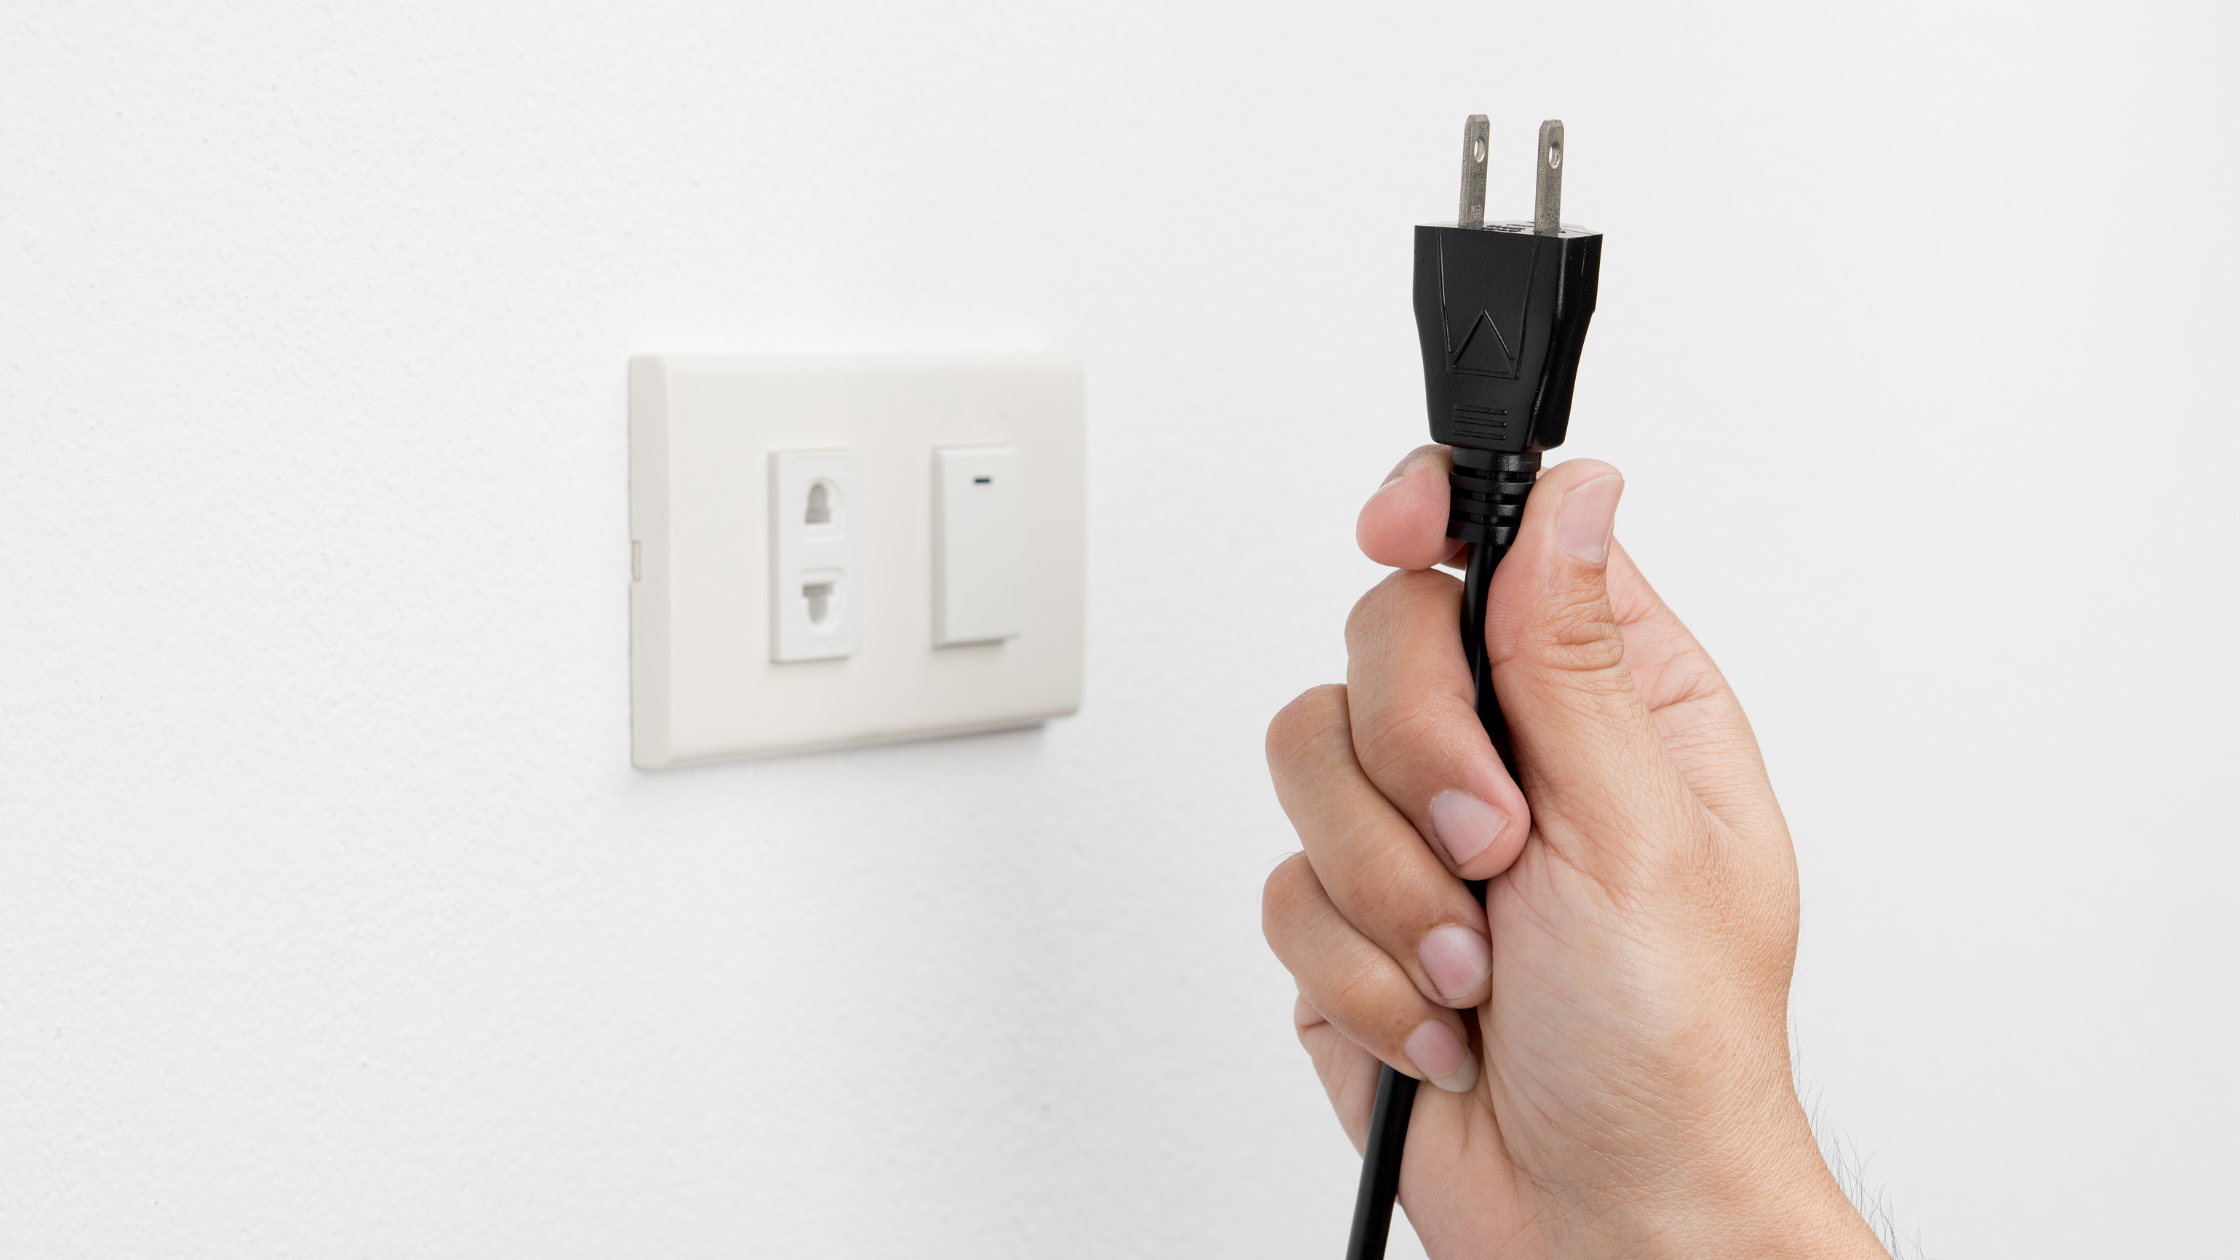 Person unplugging wall outlet to reduce EMF exposure